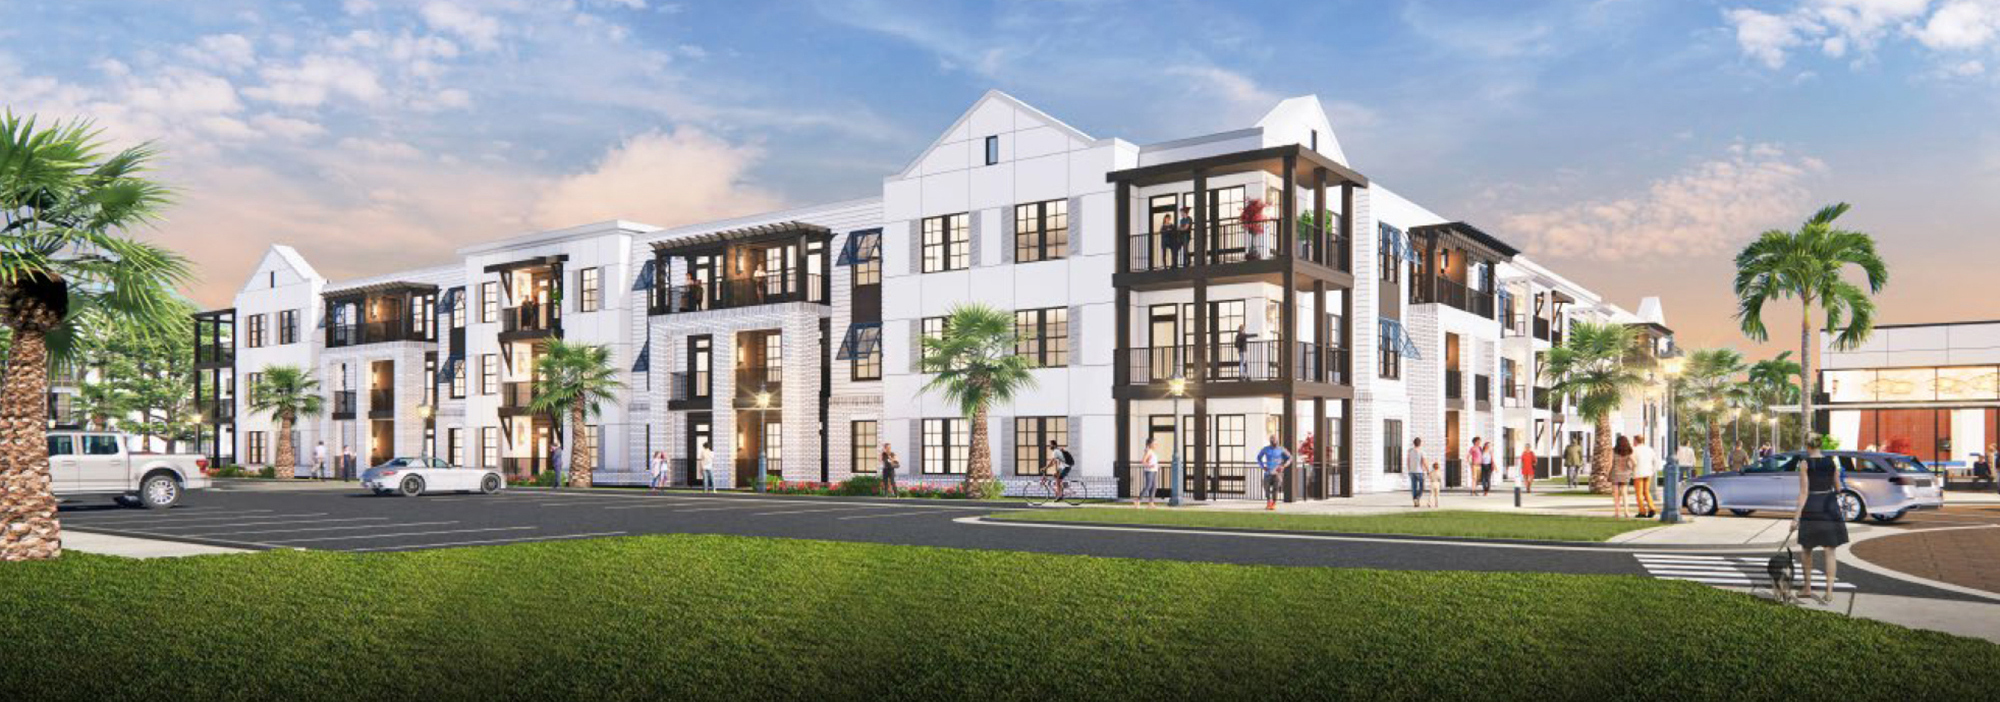 An artist's rendering of the 427-unit apartment community planned at the site of the Jacksonville Beach Adventure Landing.